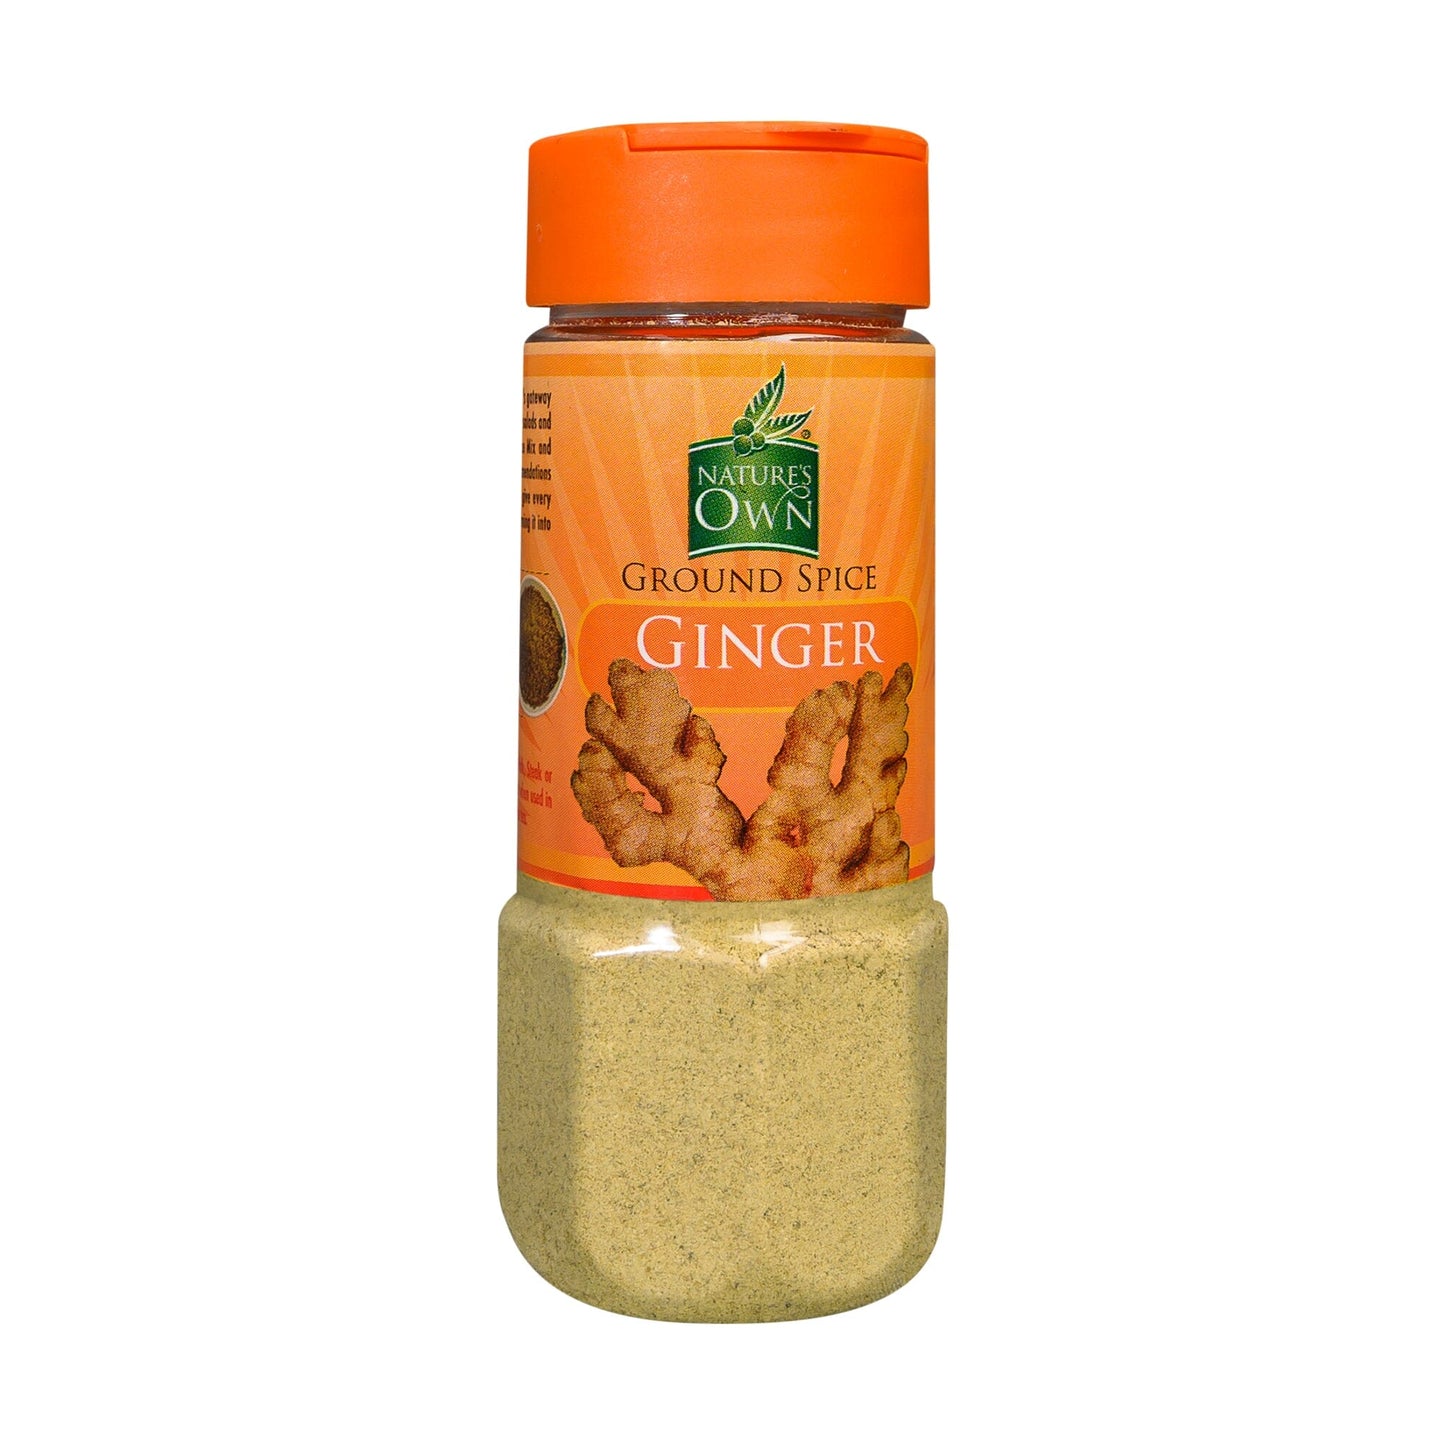 Nature's Own Ground Spice Ginger